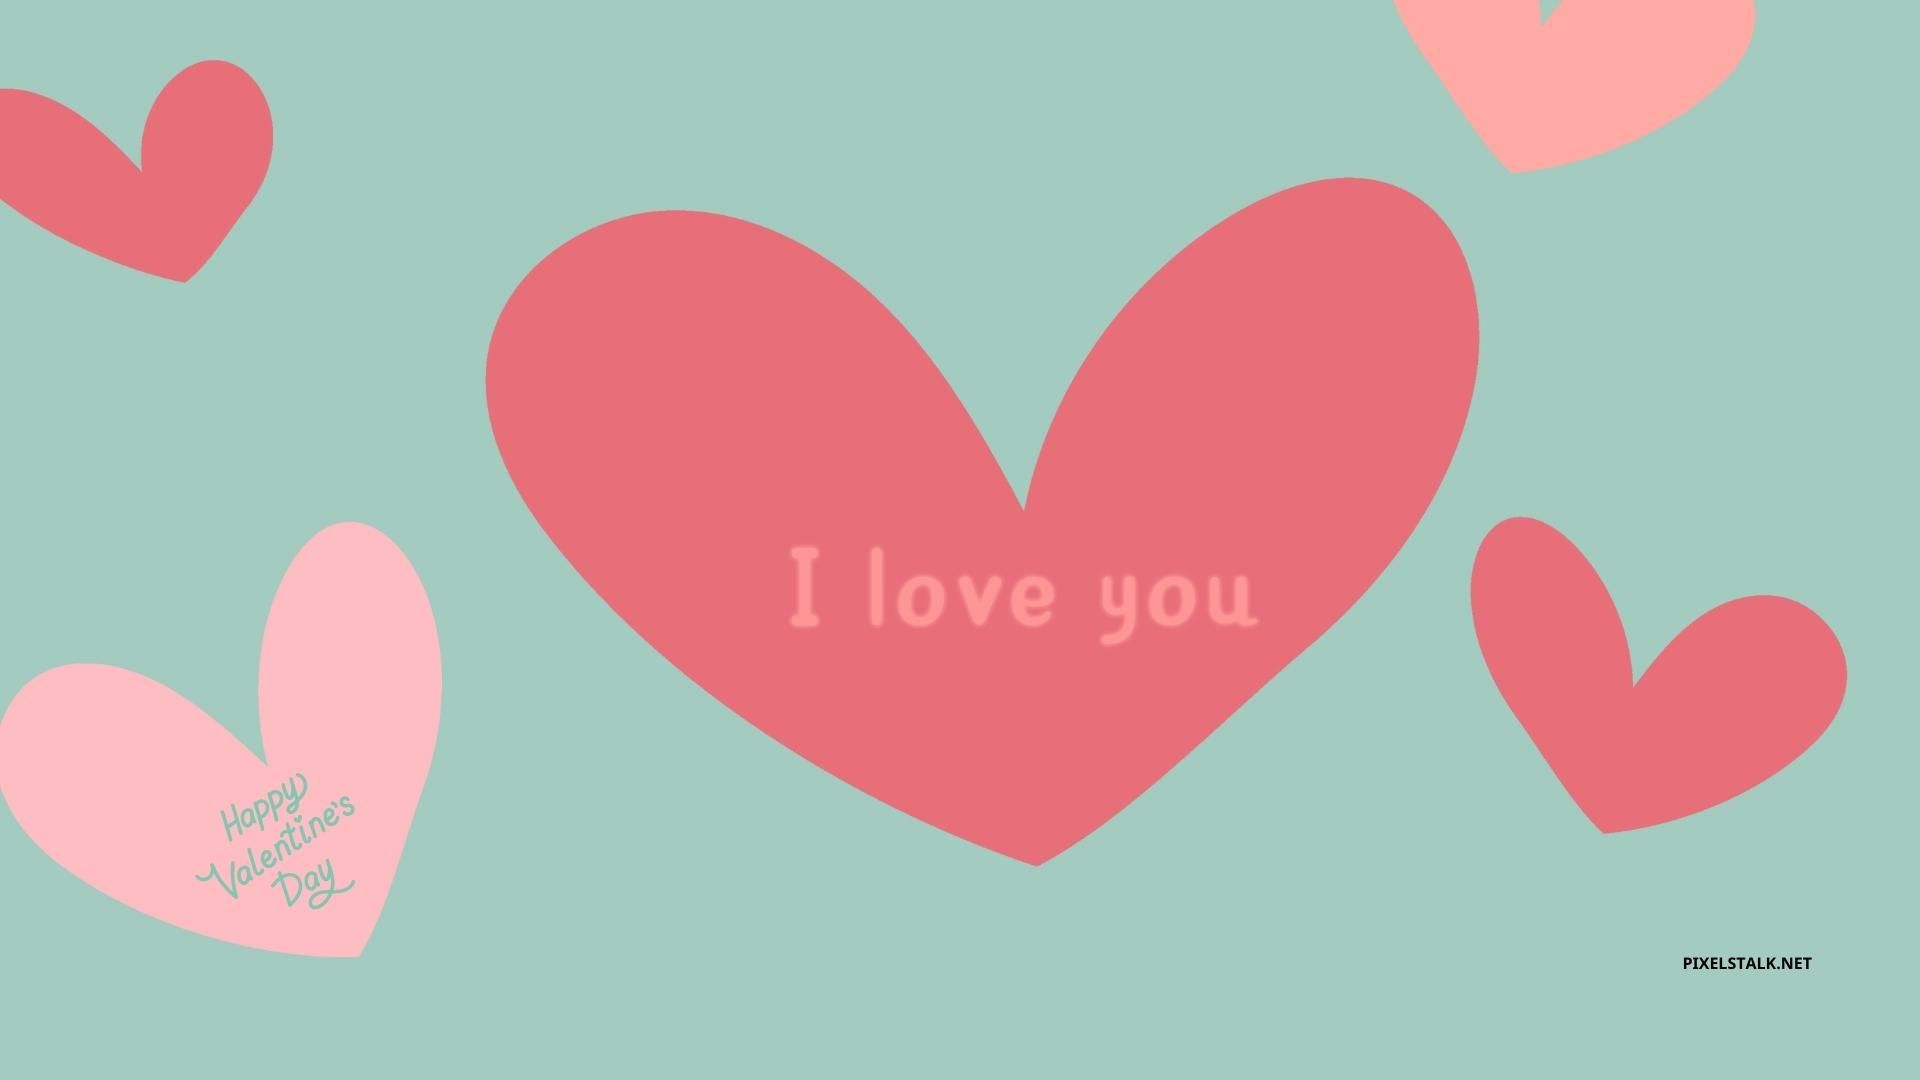 I love you wallpaper with hearts and text - Valentine's Day